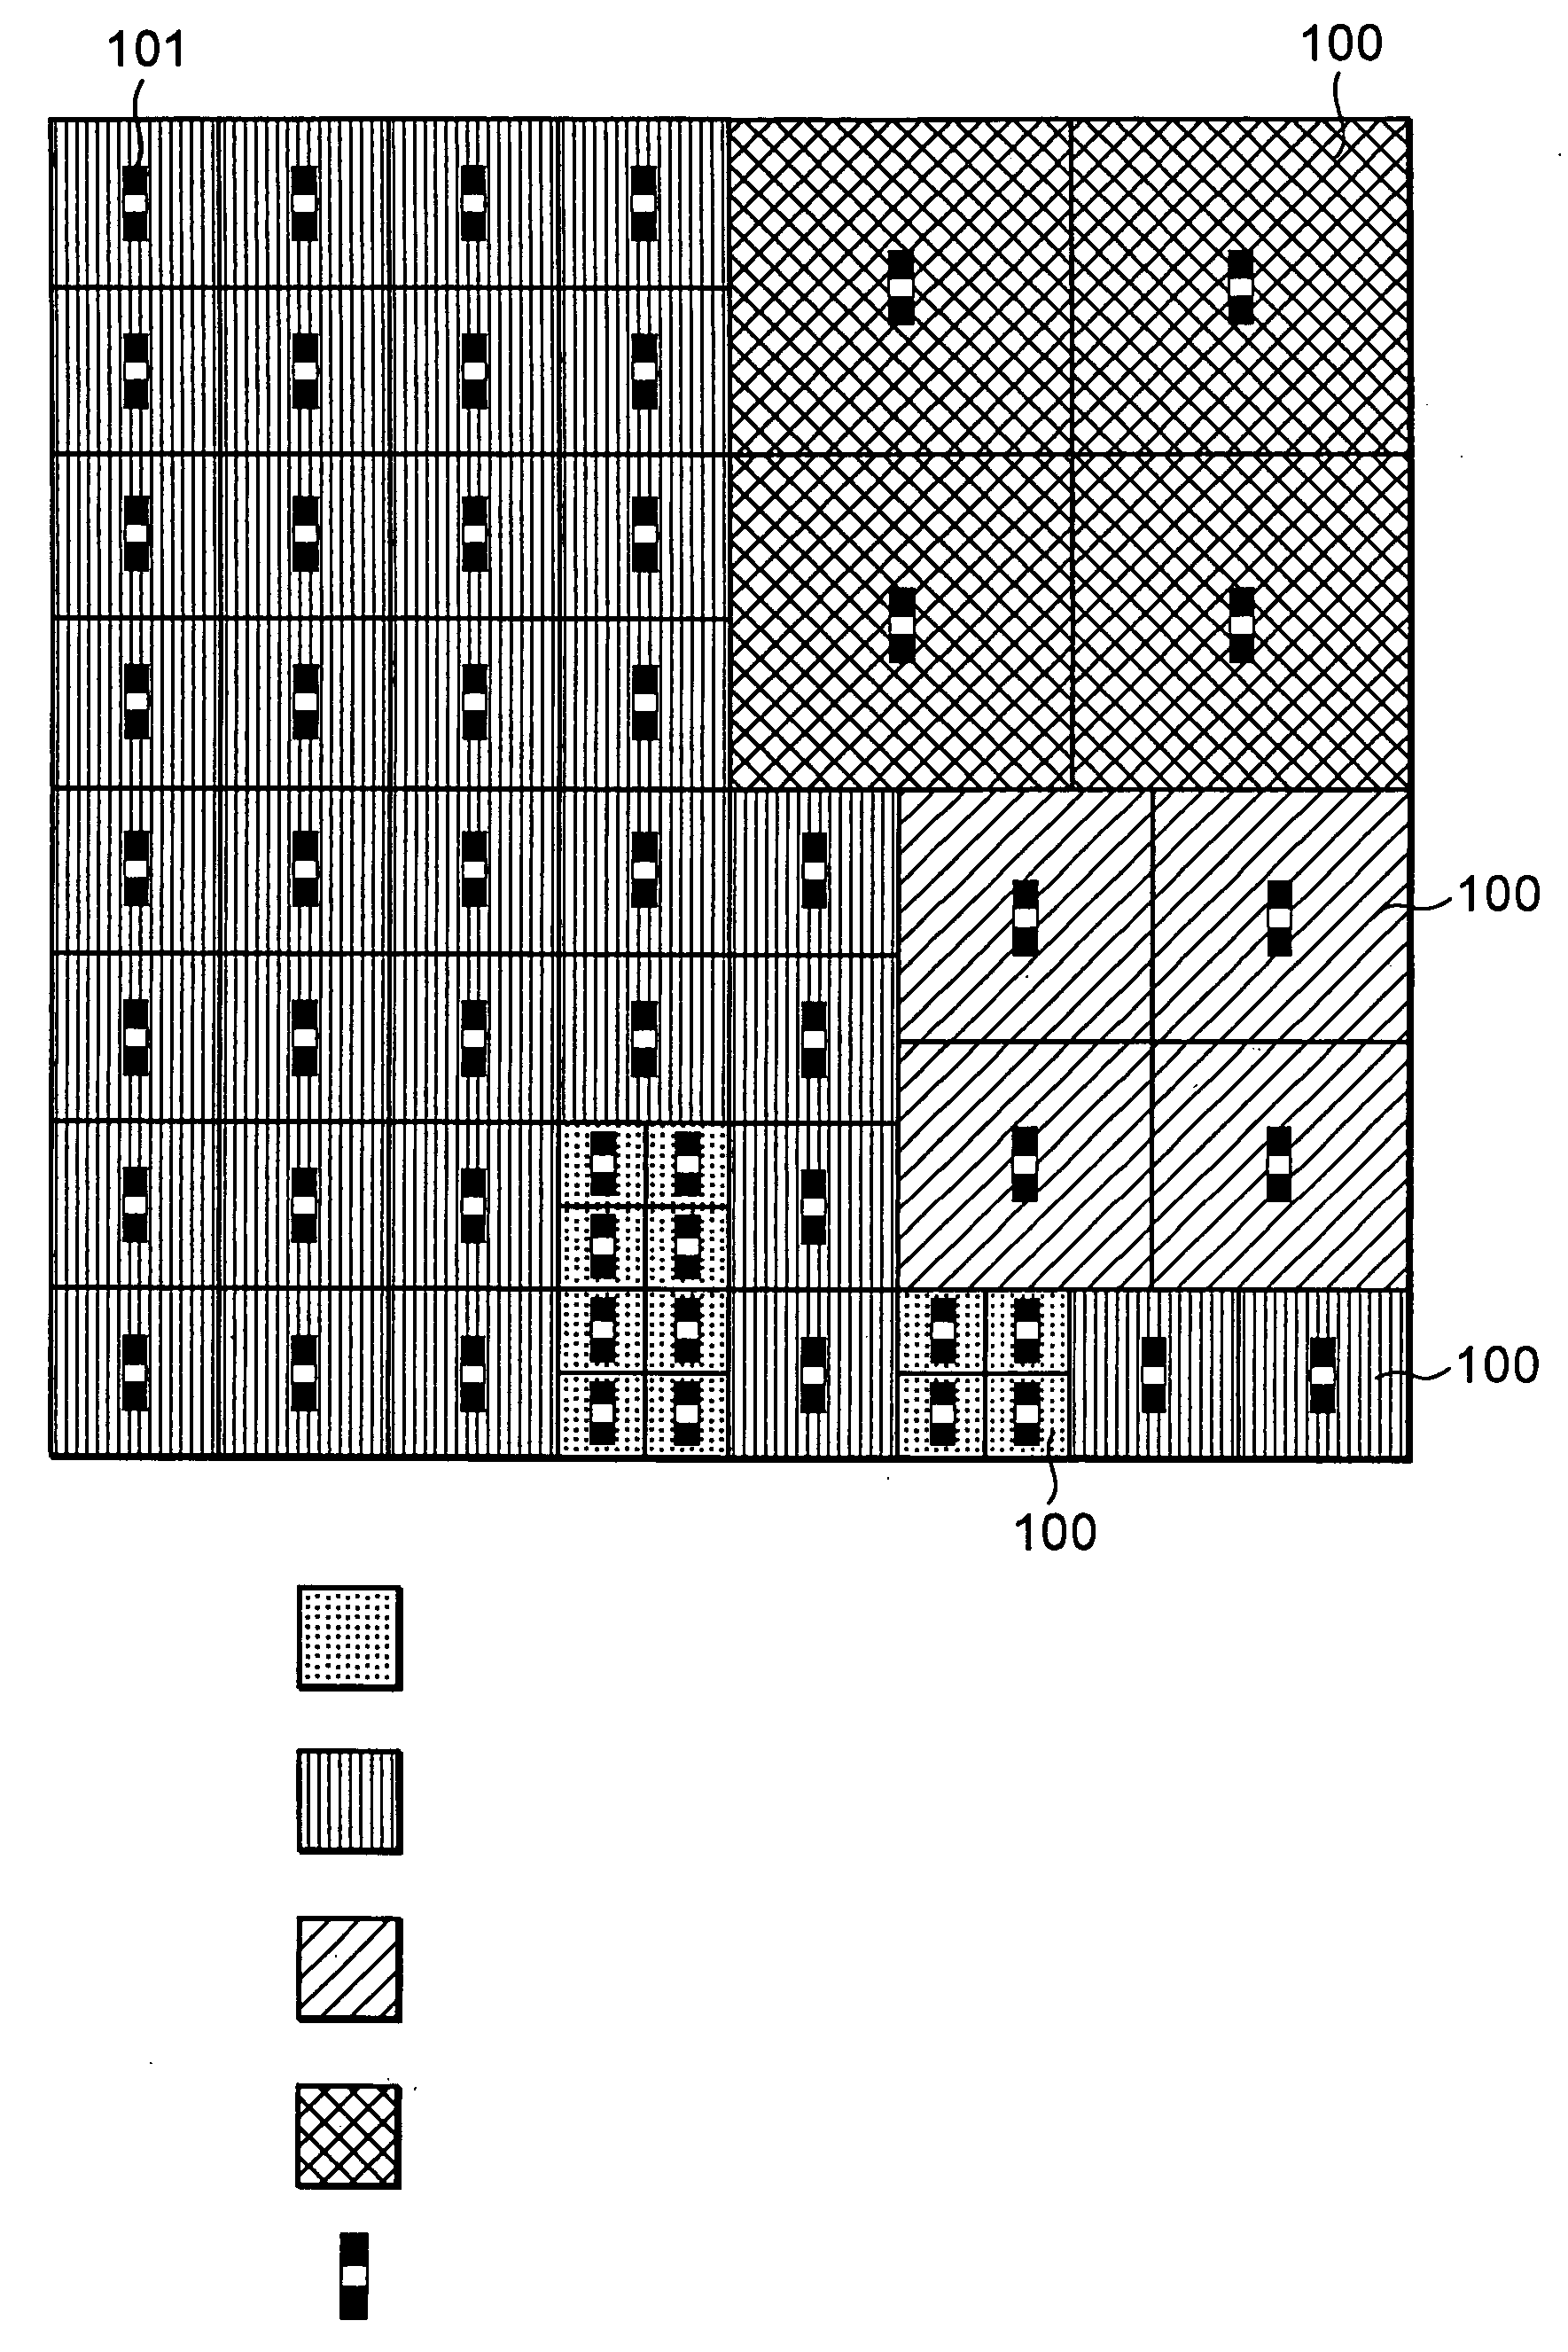 Method of determining remaining film thickness in polishing process